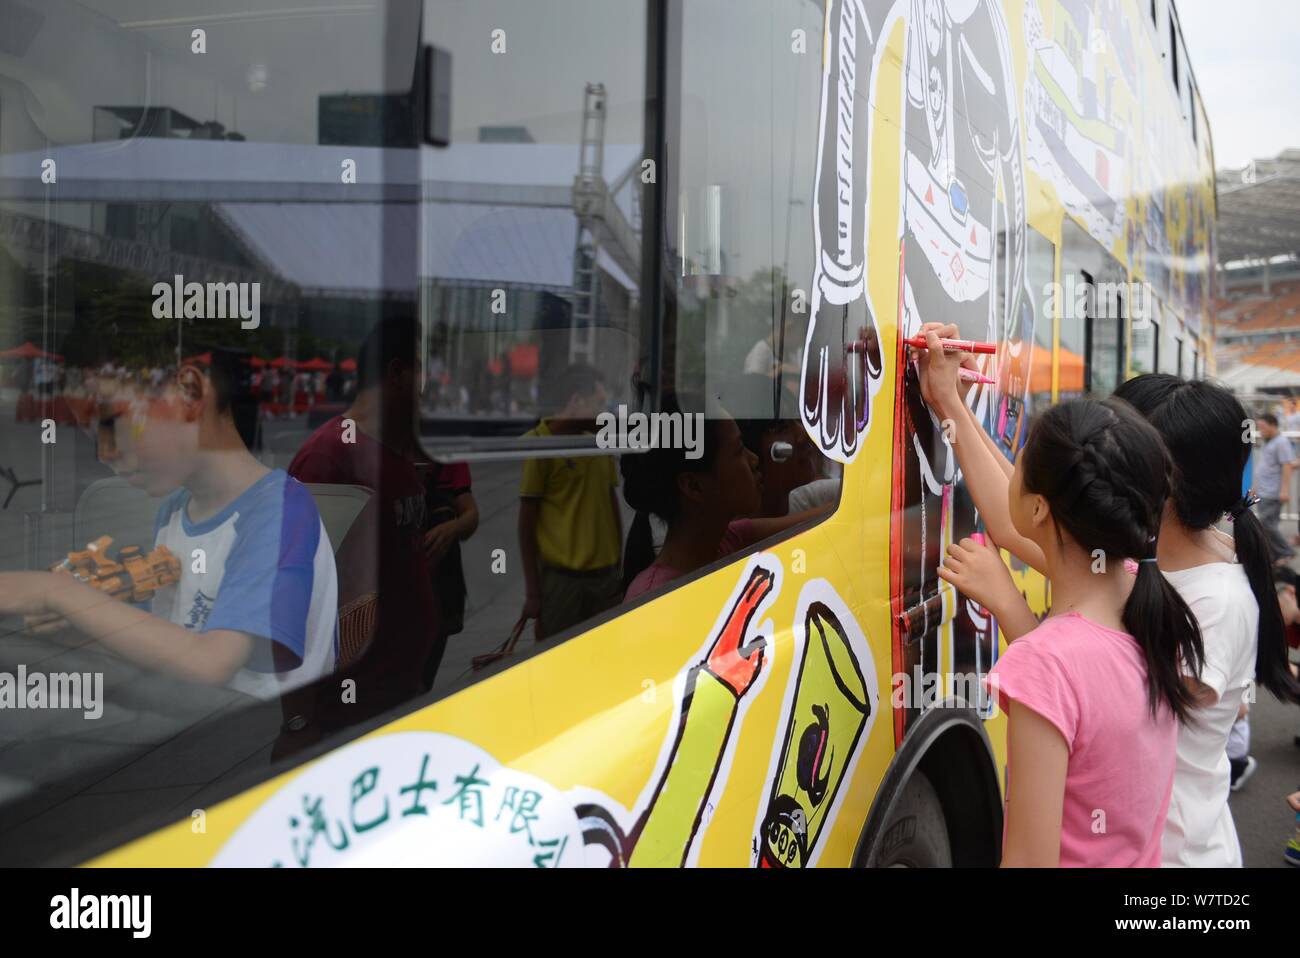 Chinese children paint a police-themed bus ahead of the International Children's Day in Guangzhou city, south China's Guangdong province, 30 May 2017. Stock Photo